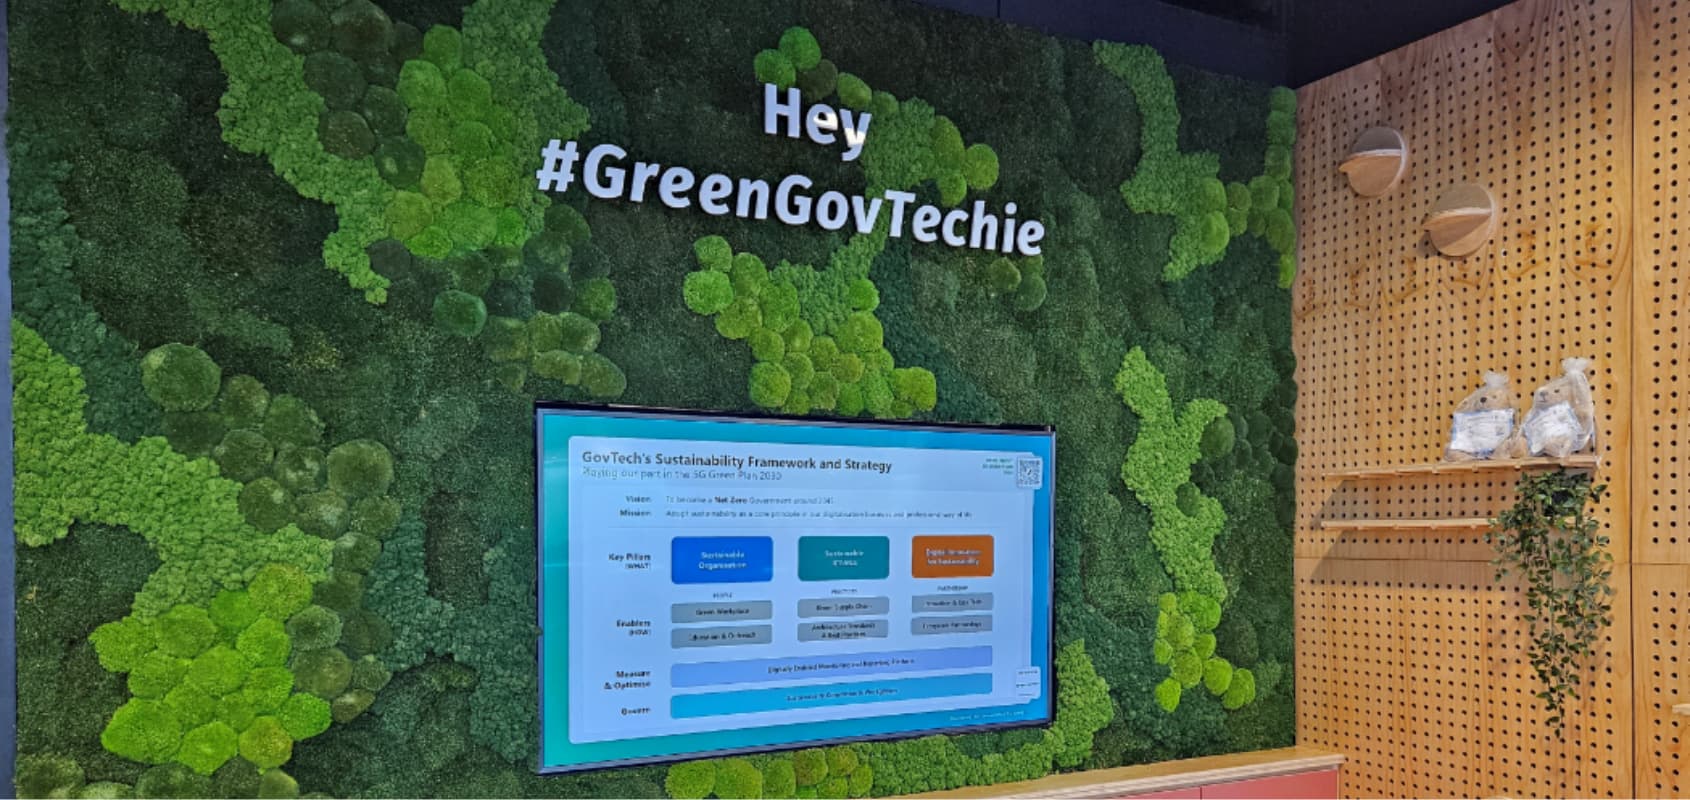 Sustainability at the core of GovTech